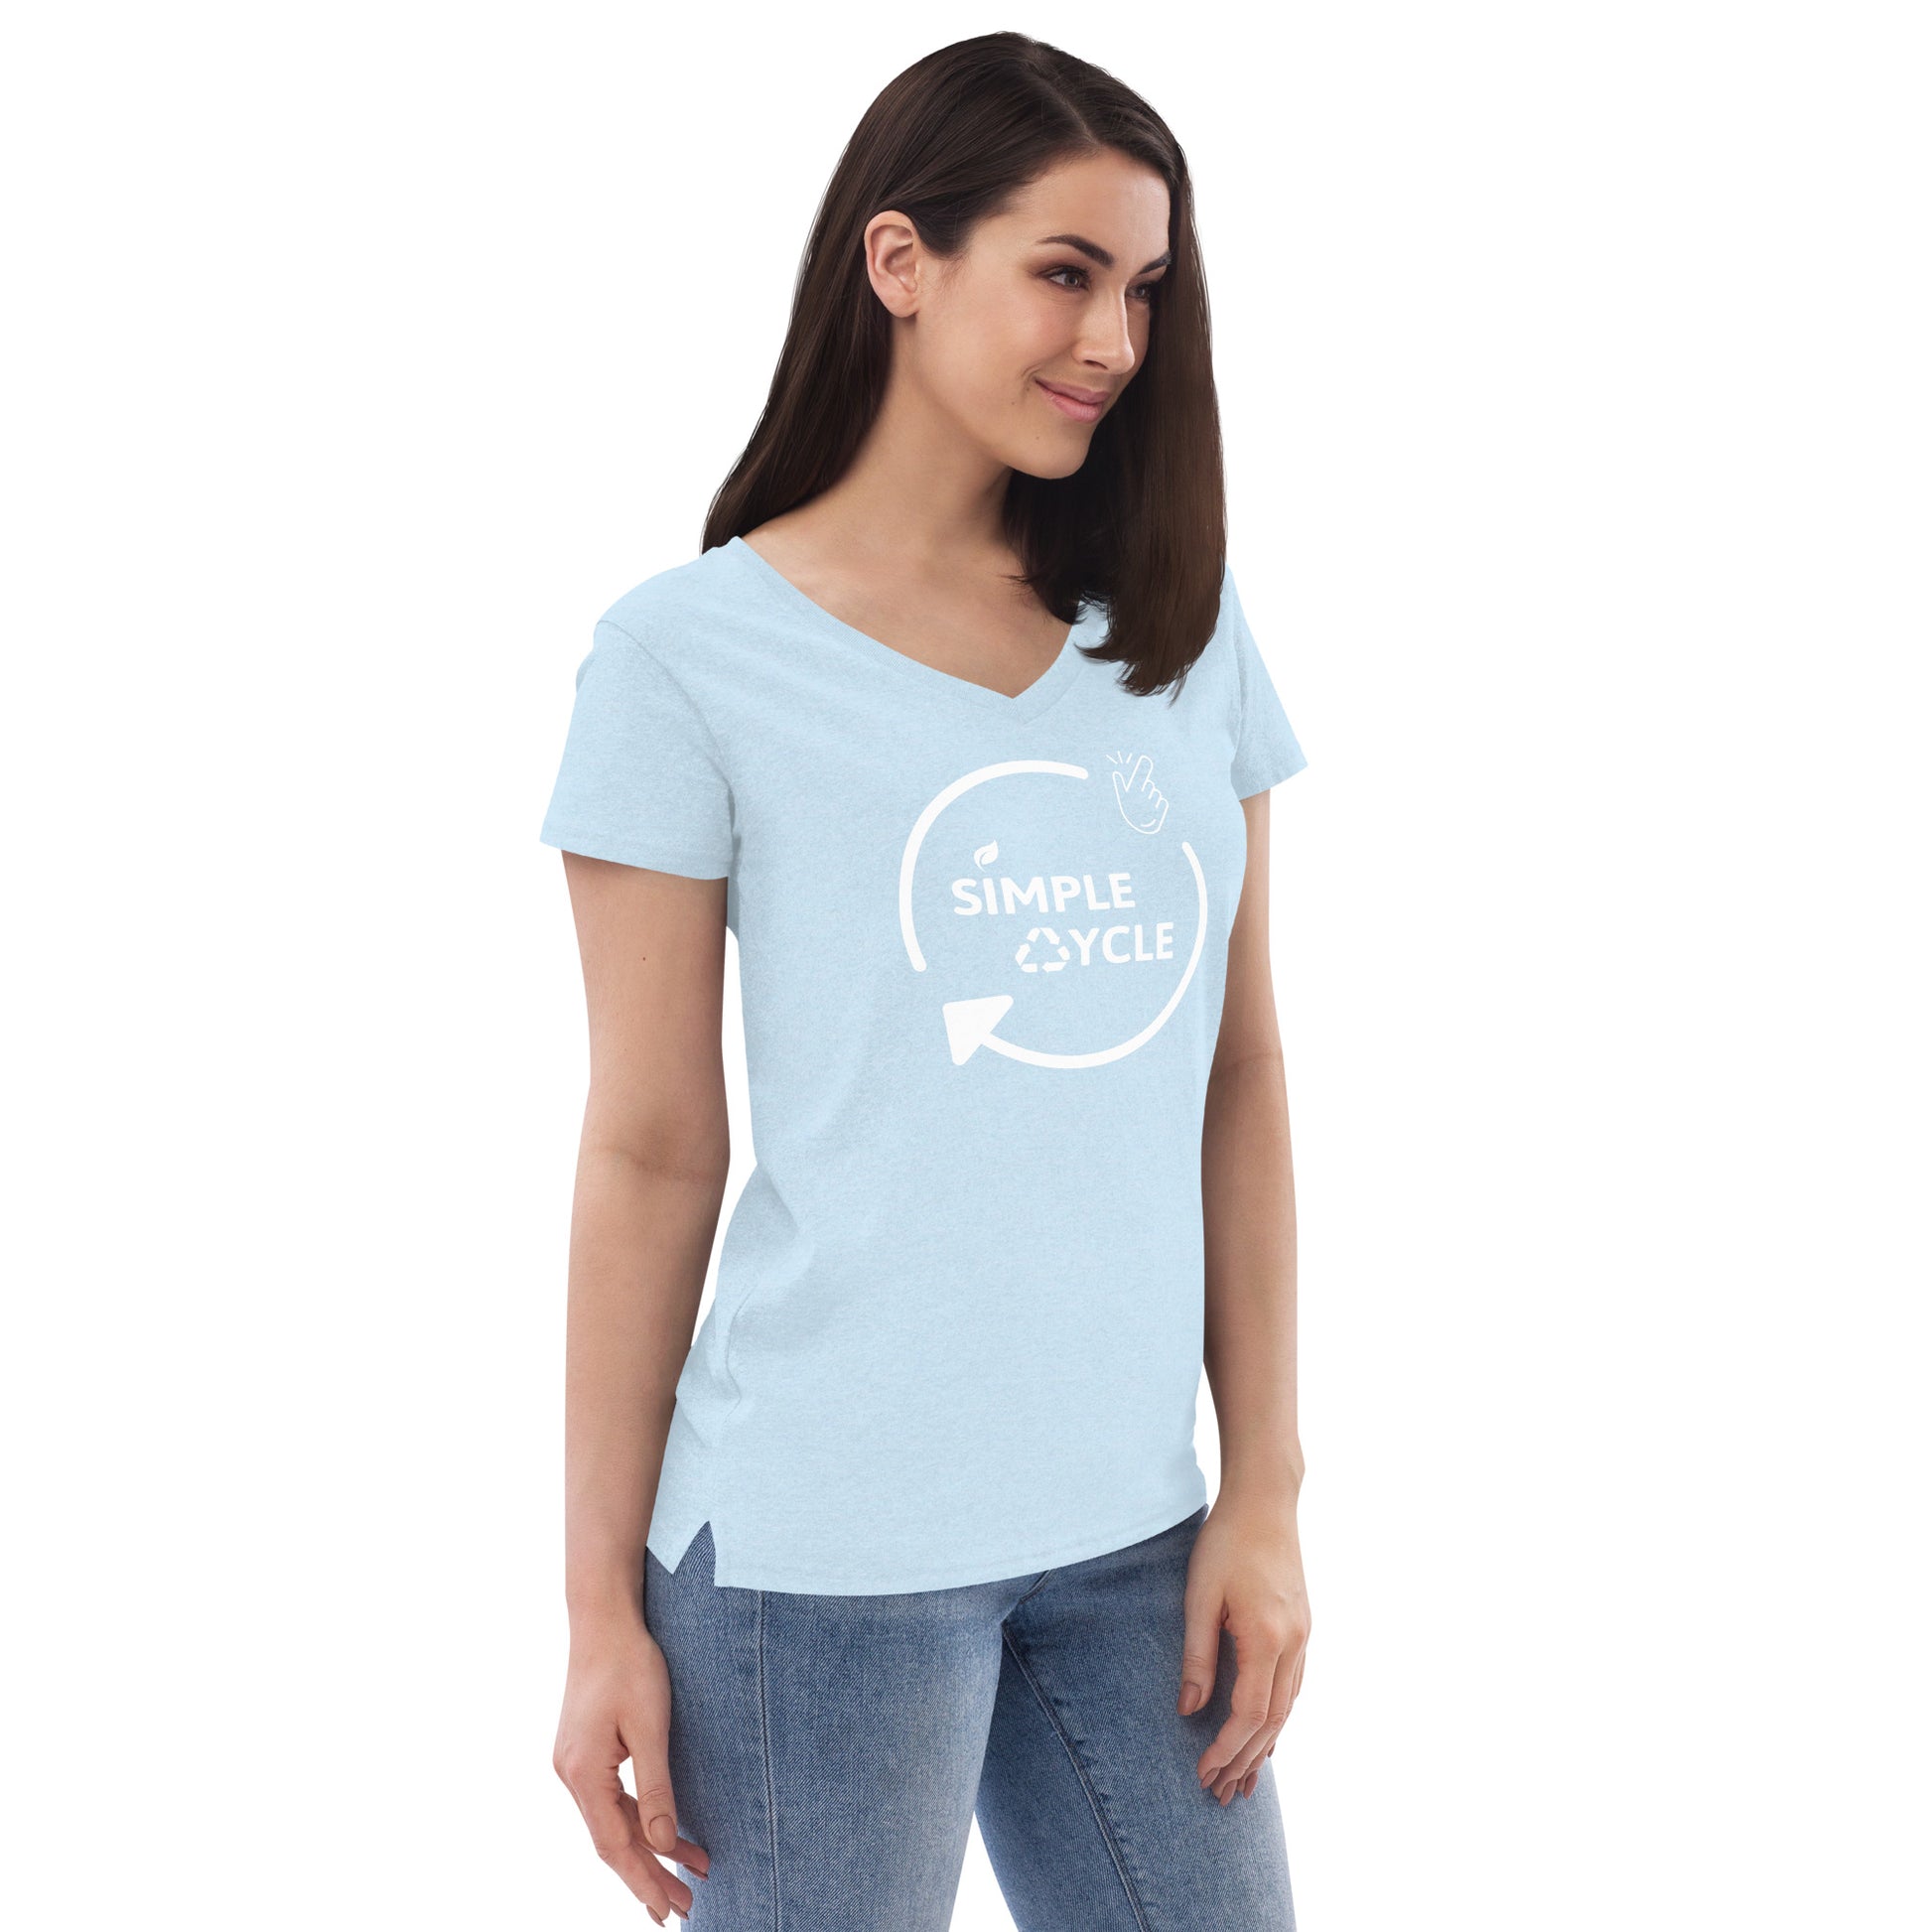 SimpleCycle Women’s Recycled V-Neck T-Shirt crystal blue right front